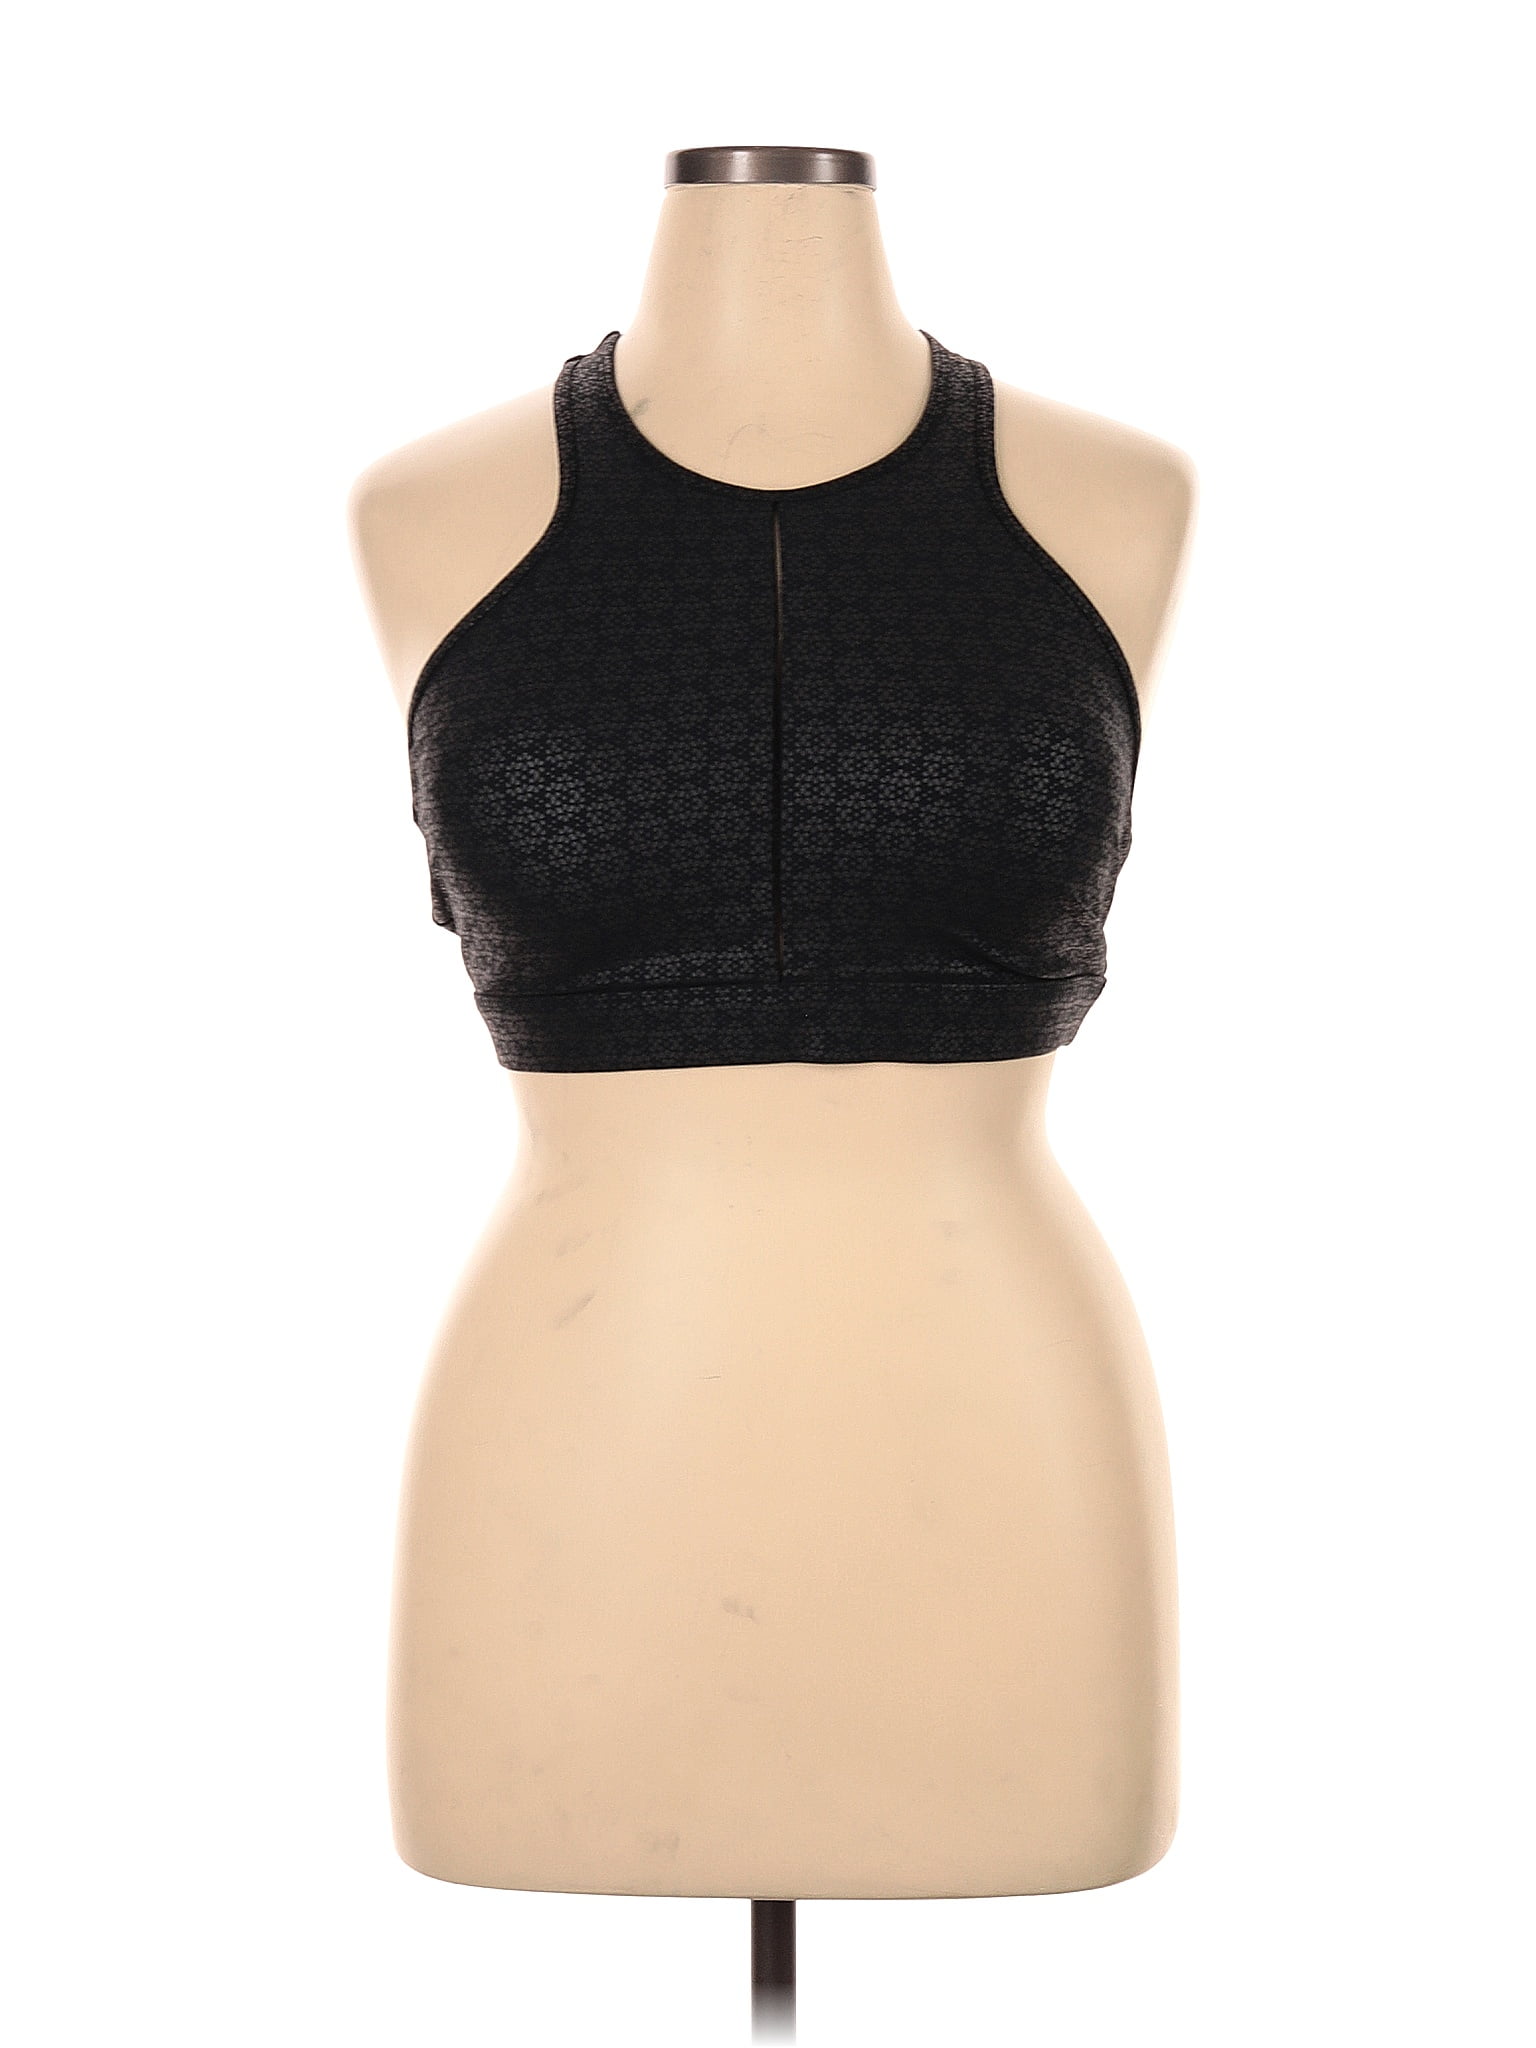 Zyia Active Brown Sports Bra Size XL - 57% off